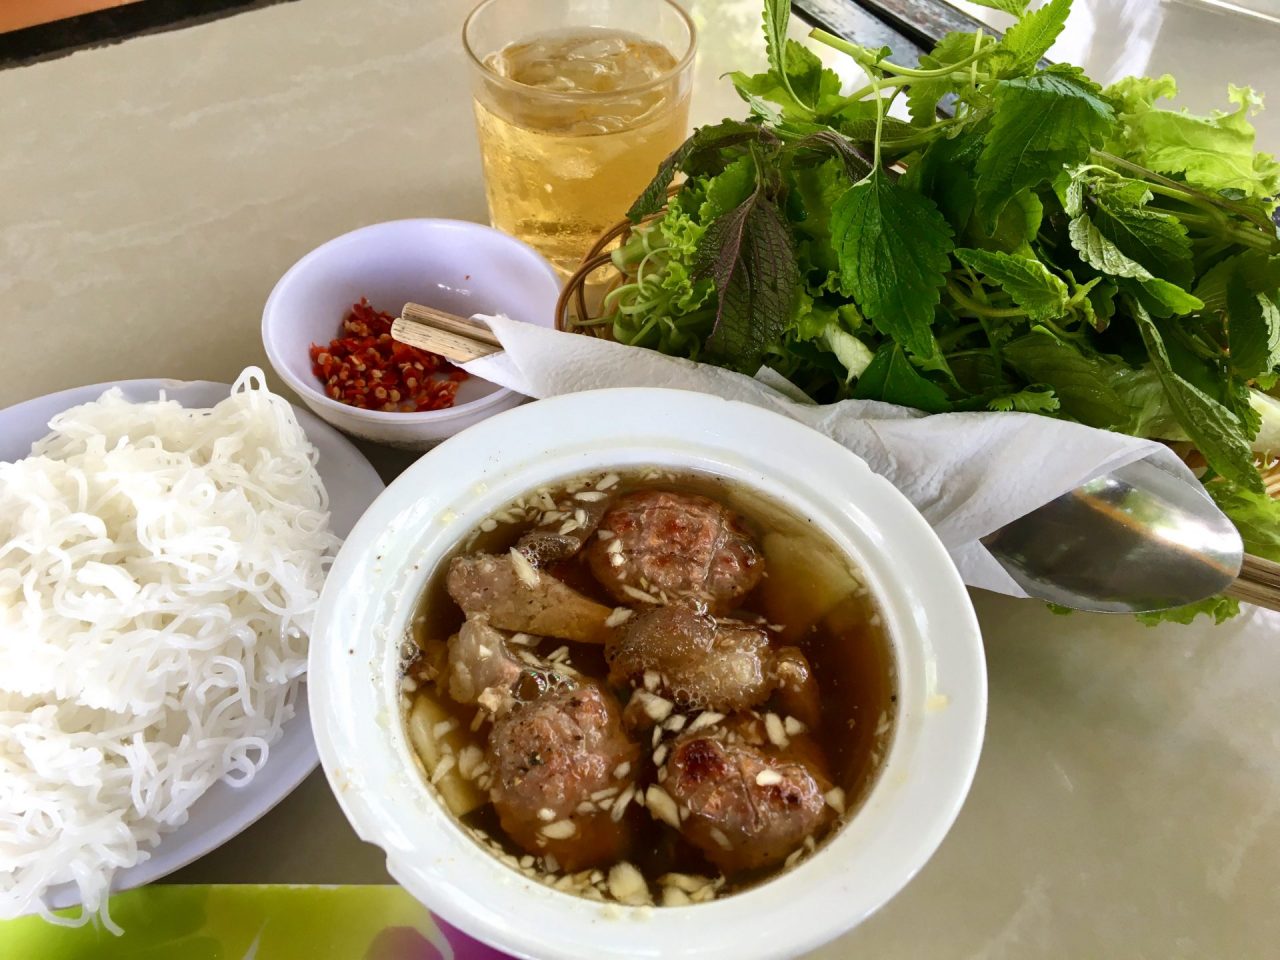 Bún Chả Ha Noi - Hanoi-Style Vermicelli Noodles with Grilled Pork and Herbs